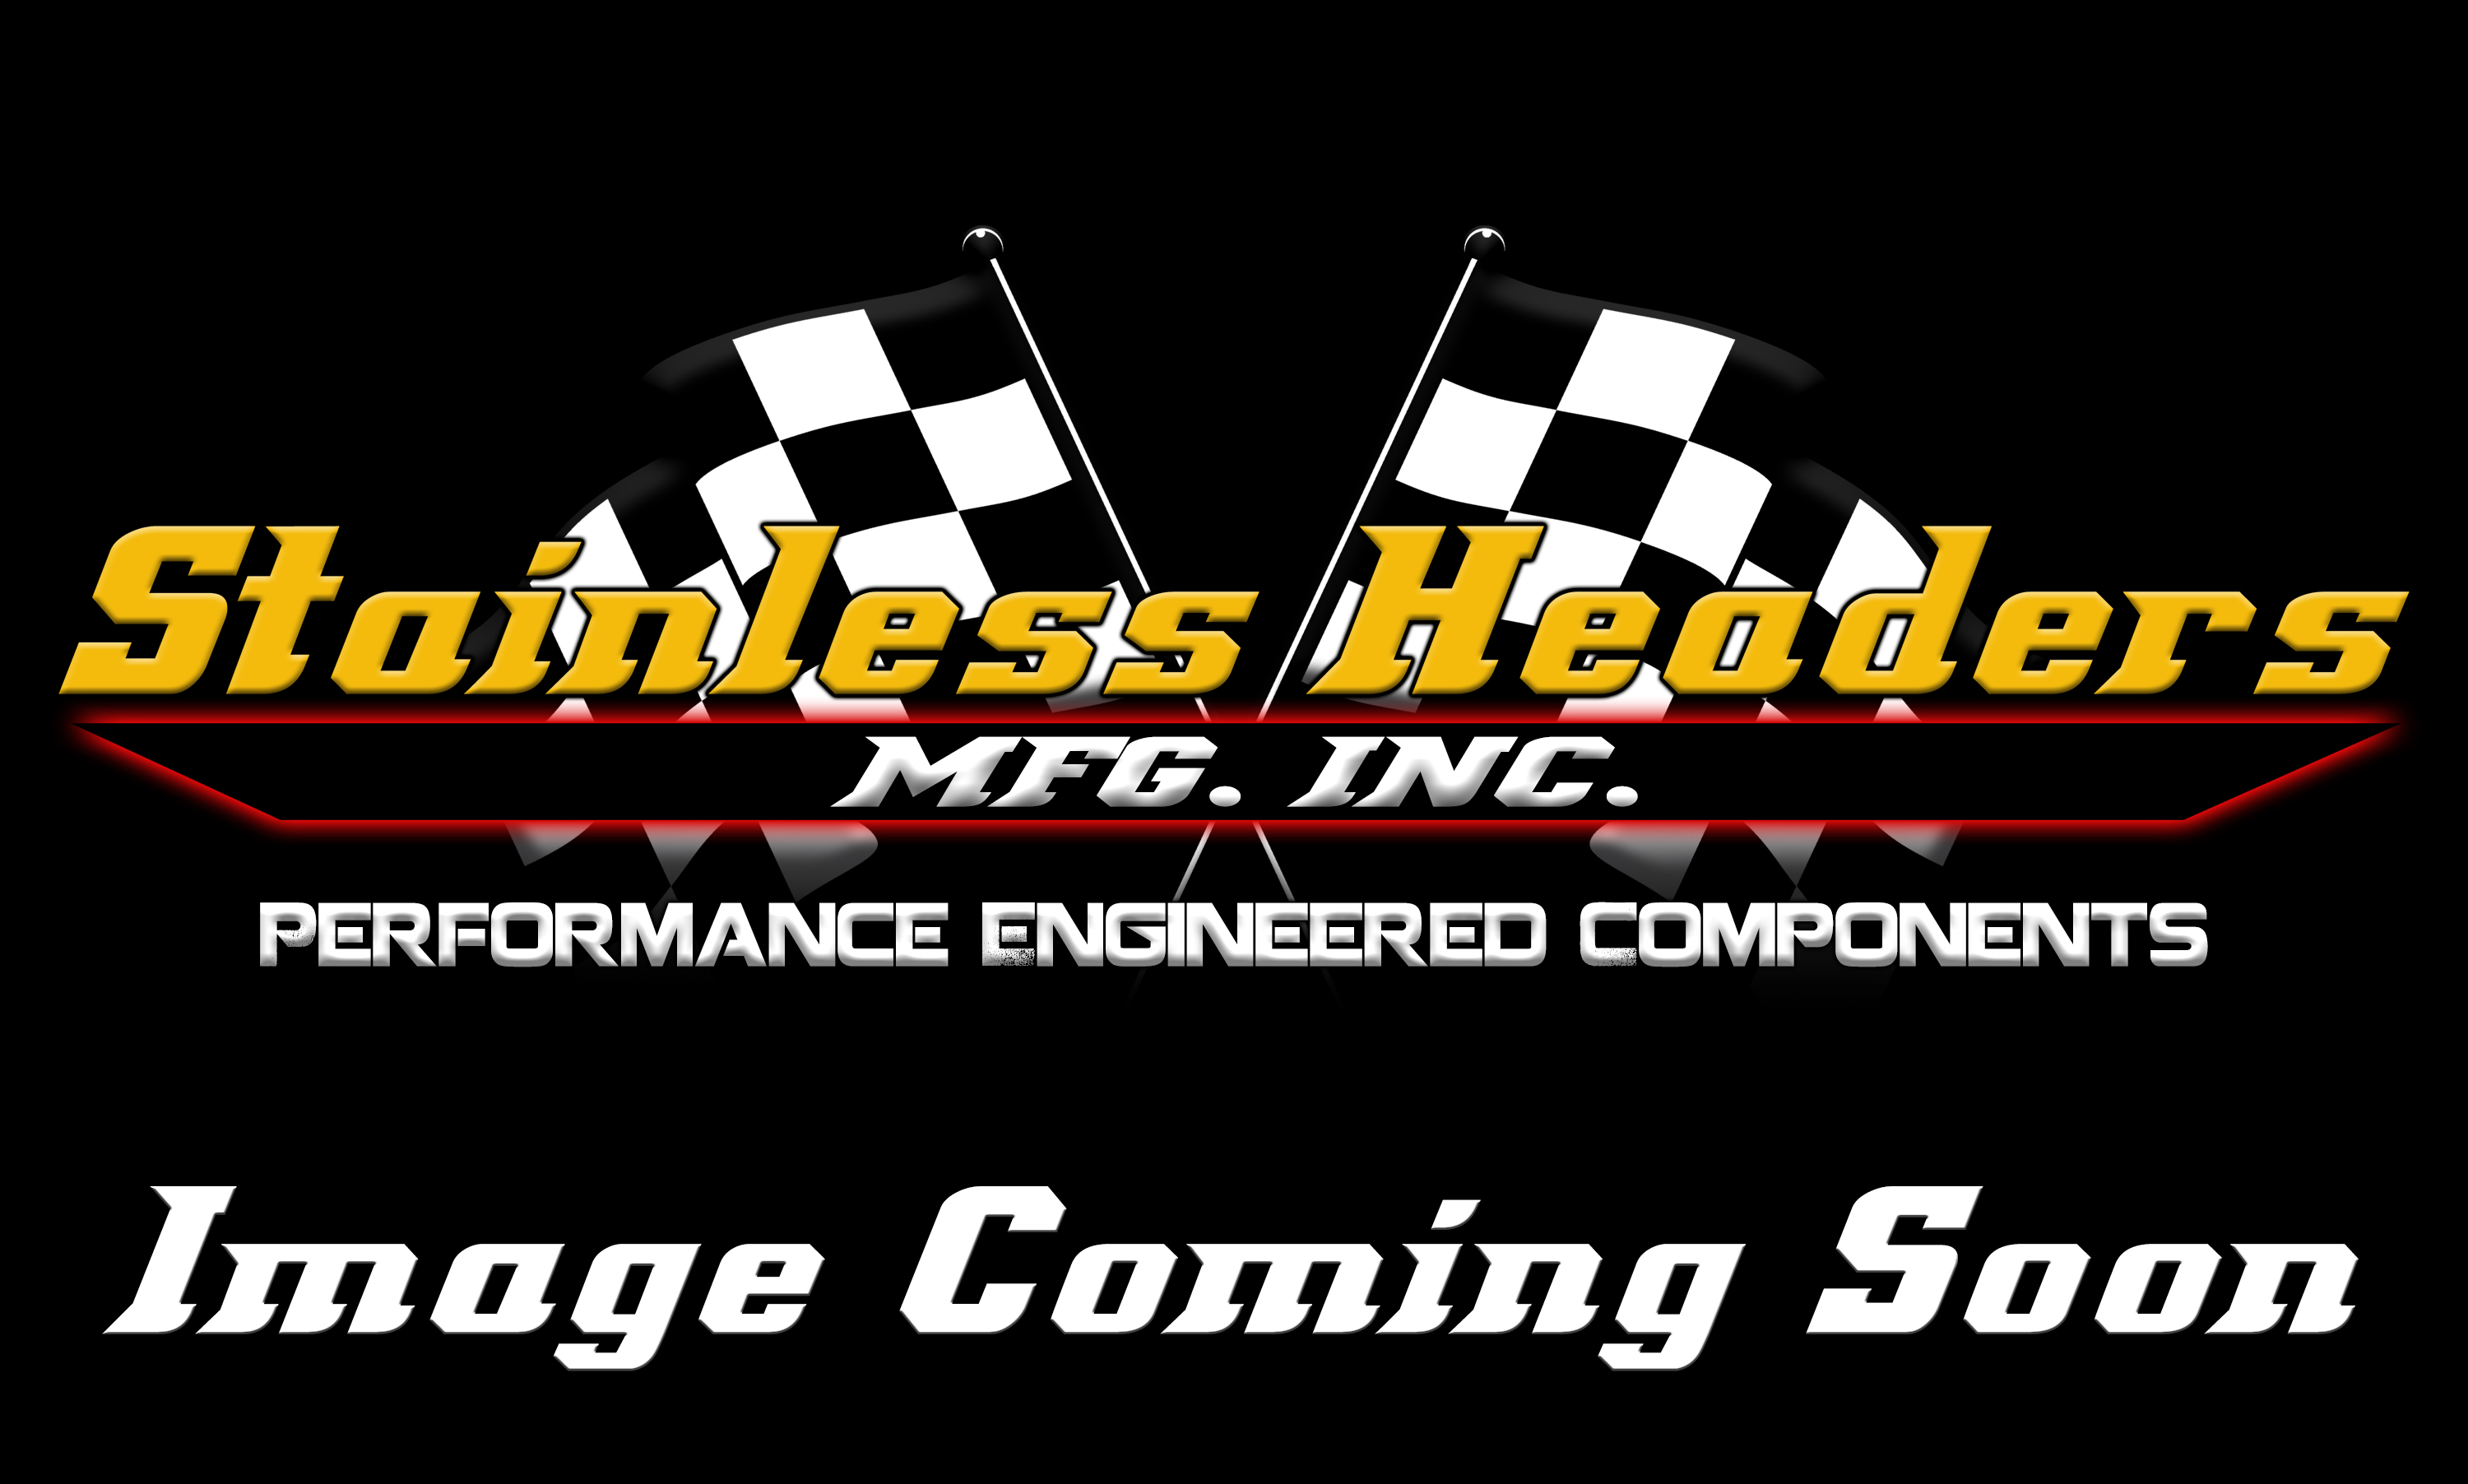 CompTurbo Technologies - CTR4202R-7485 Mid Frame Oil-Less 3.0 Turbocharger (1300 HP) - Image 2